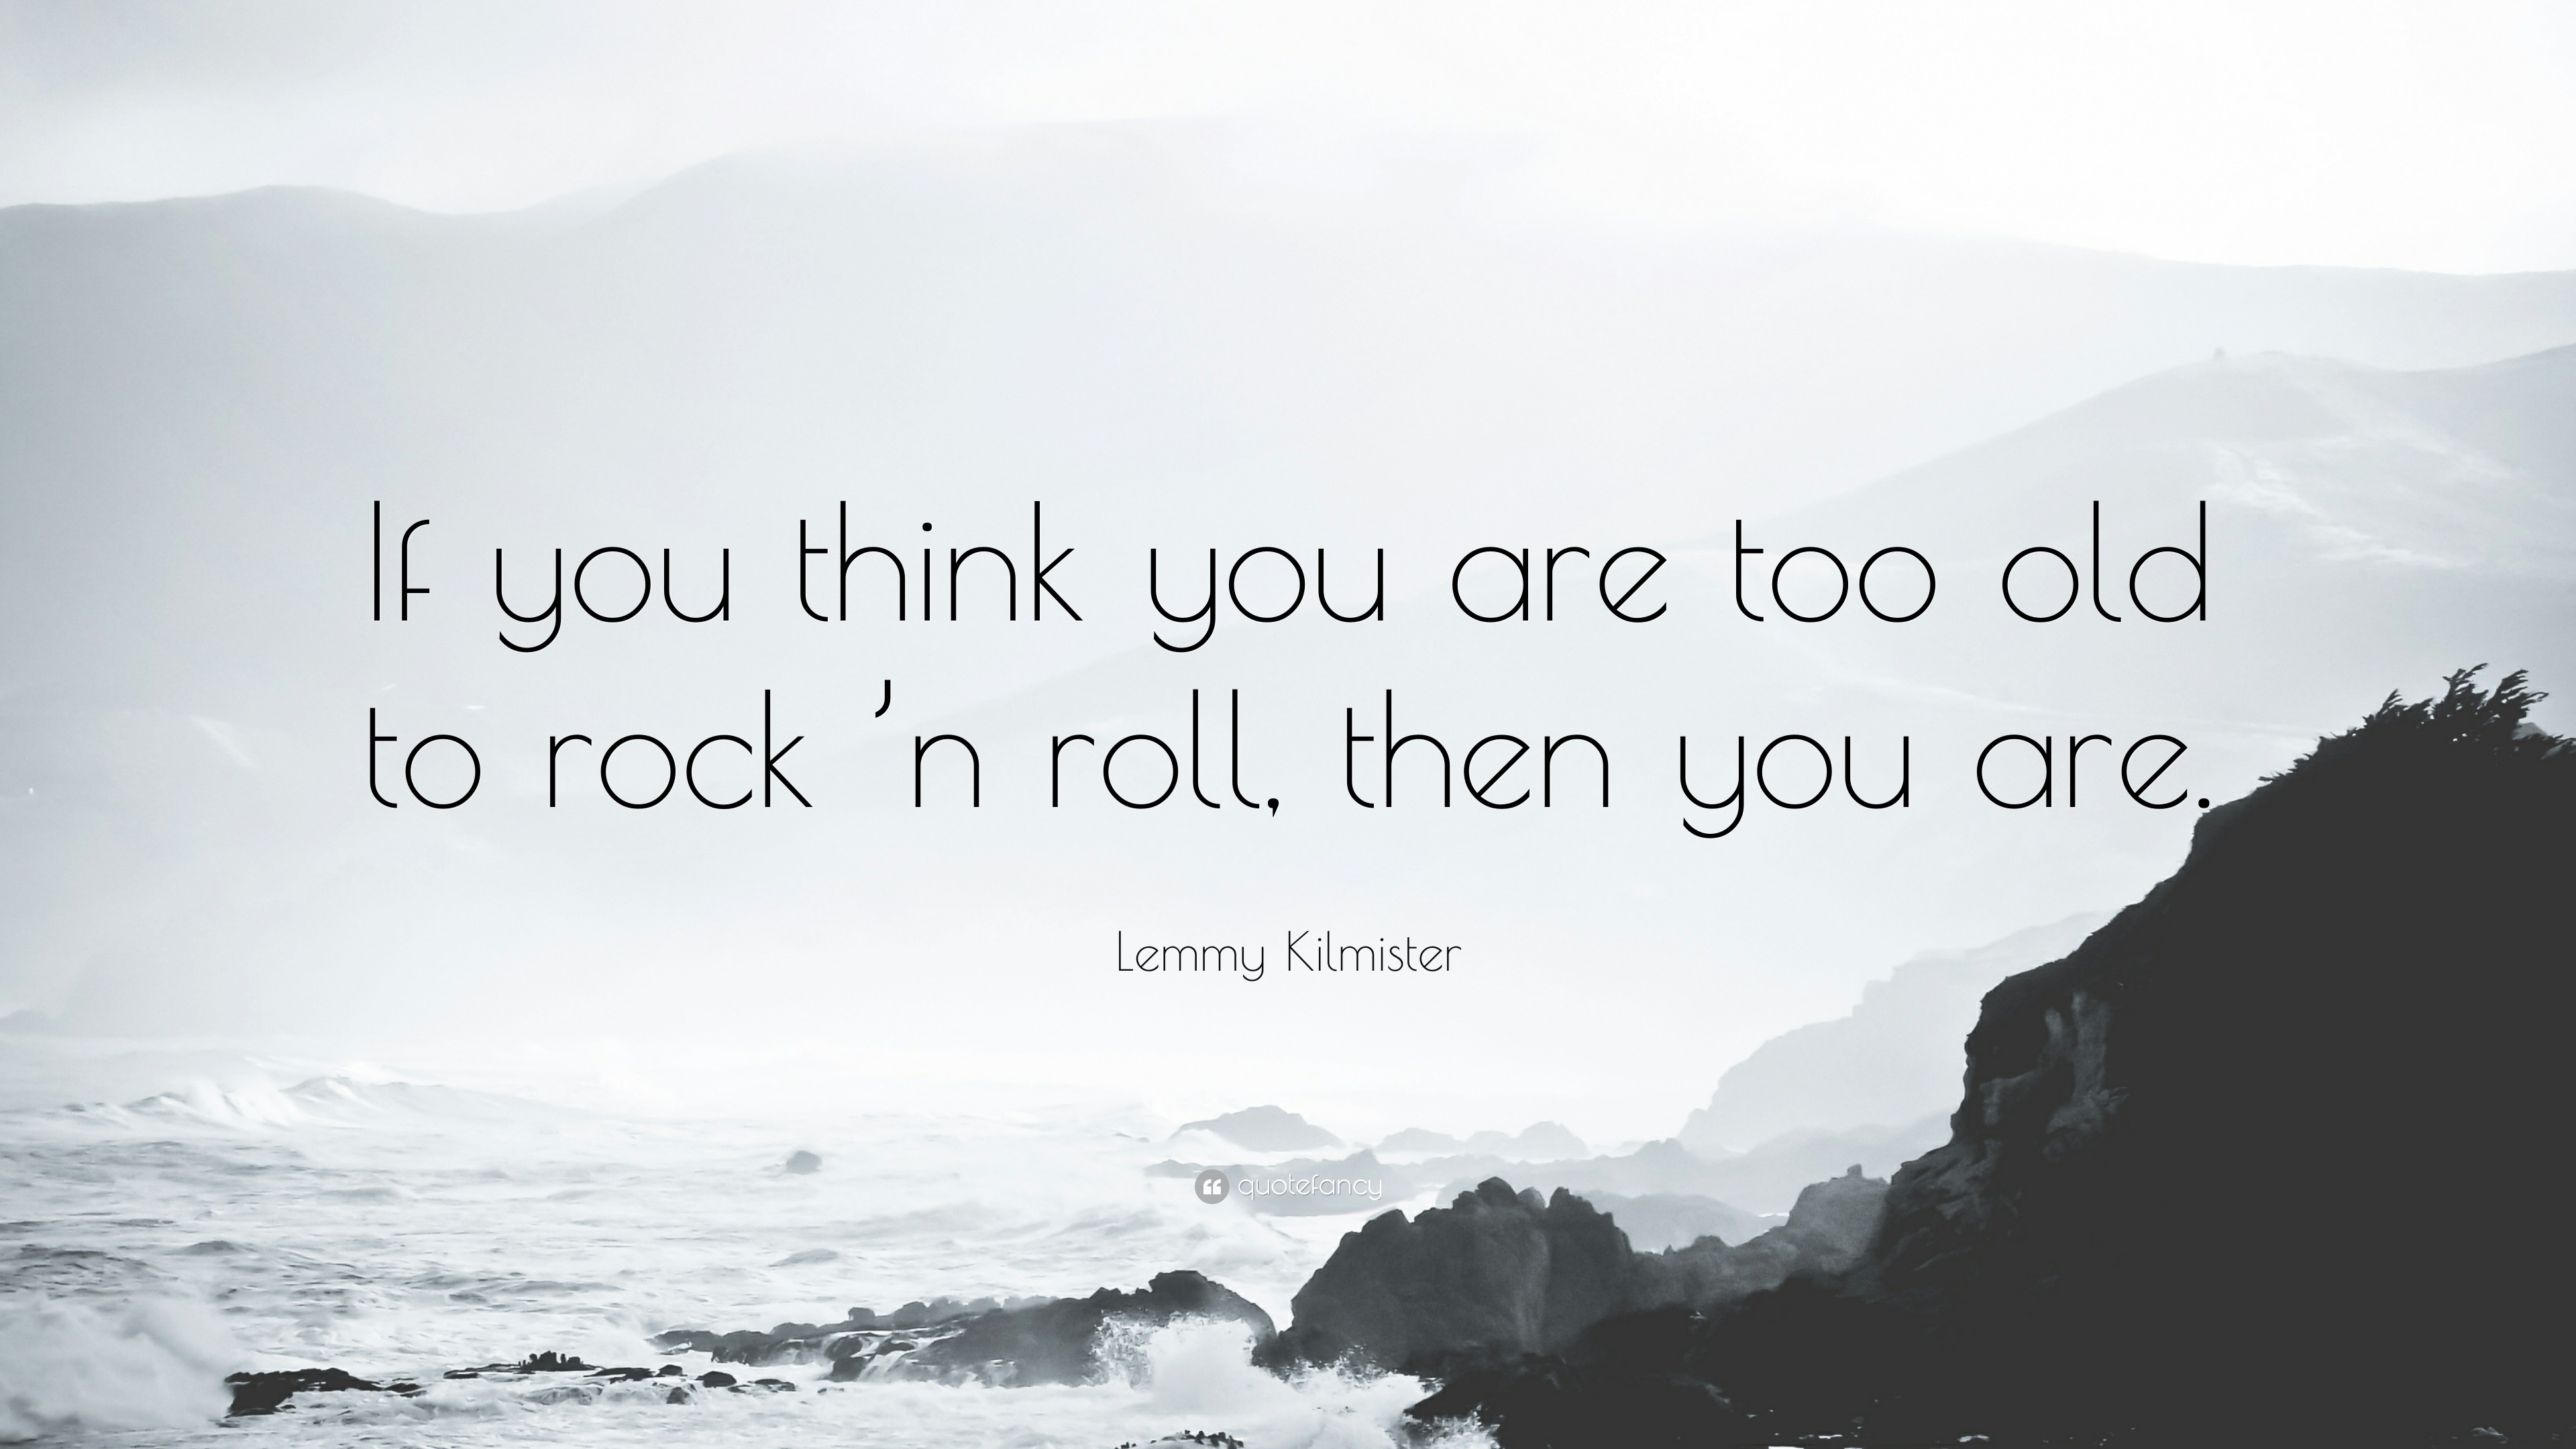 Lemmy Kilmister Quote: “If you think you are too old to rock ’n roll